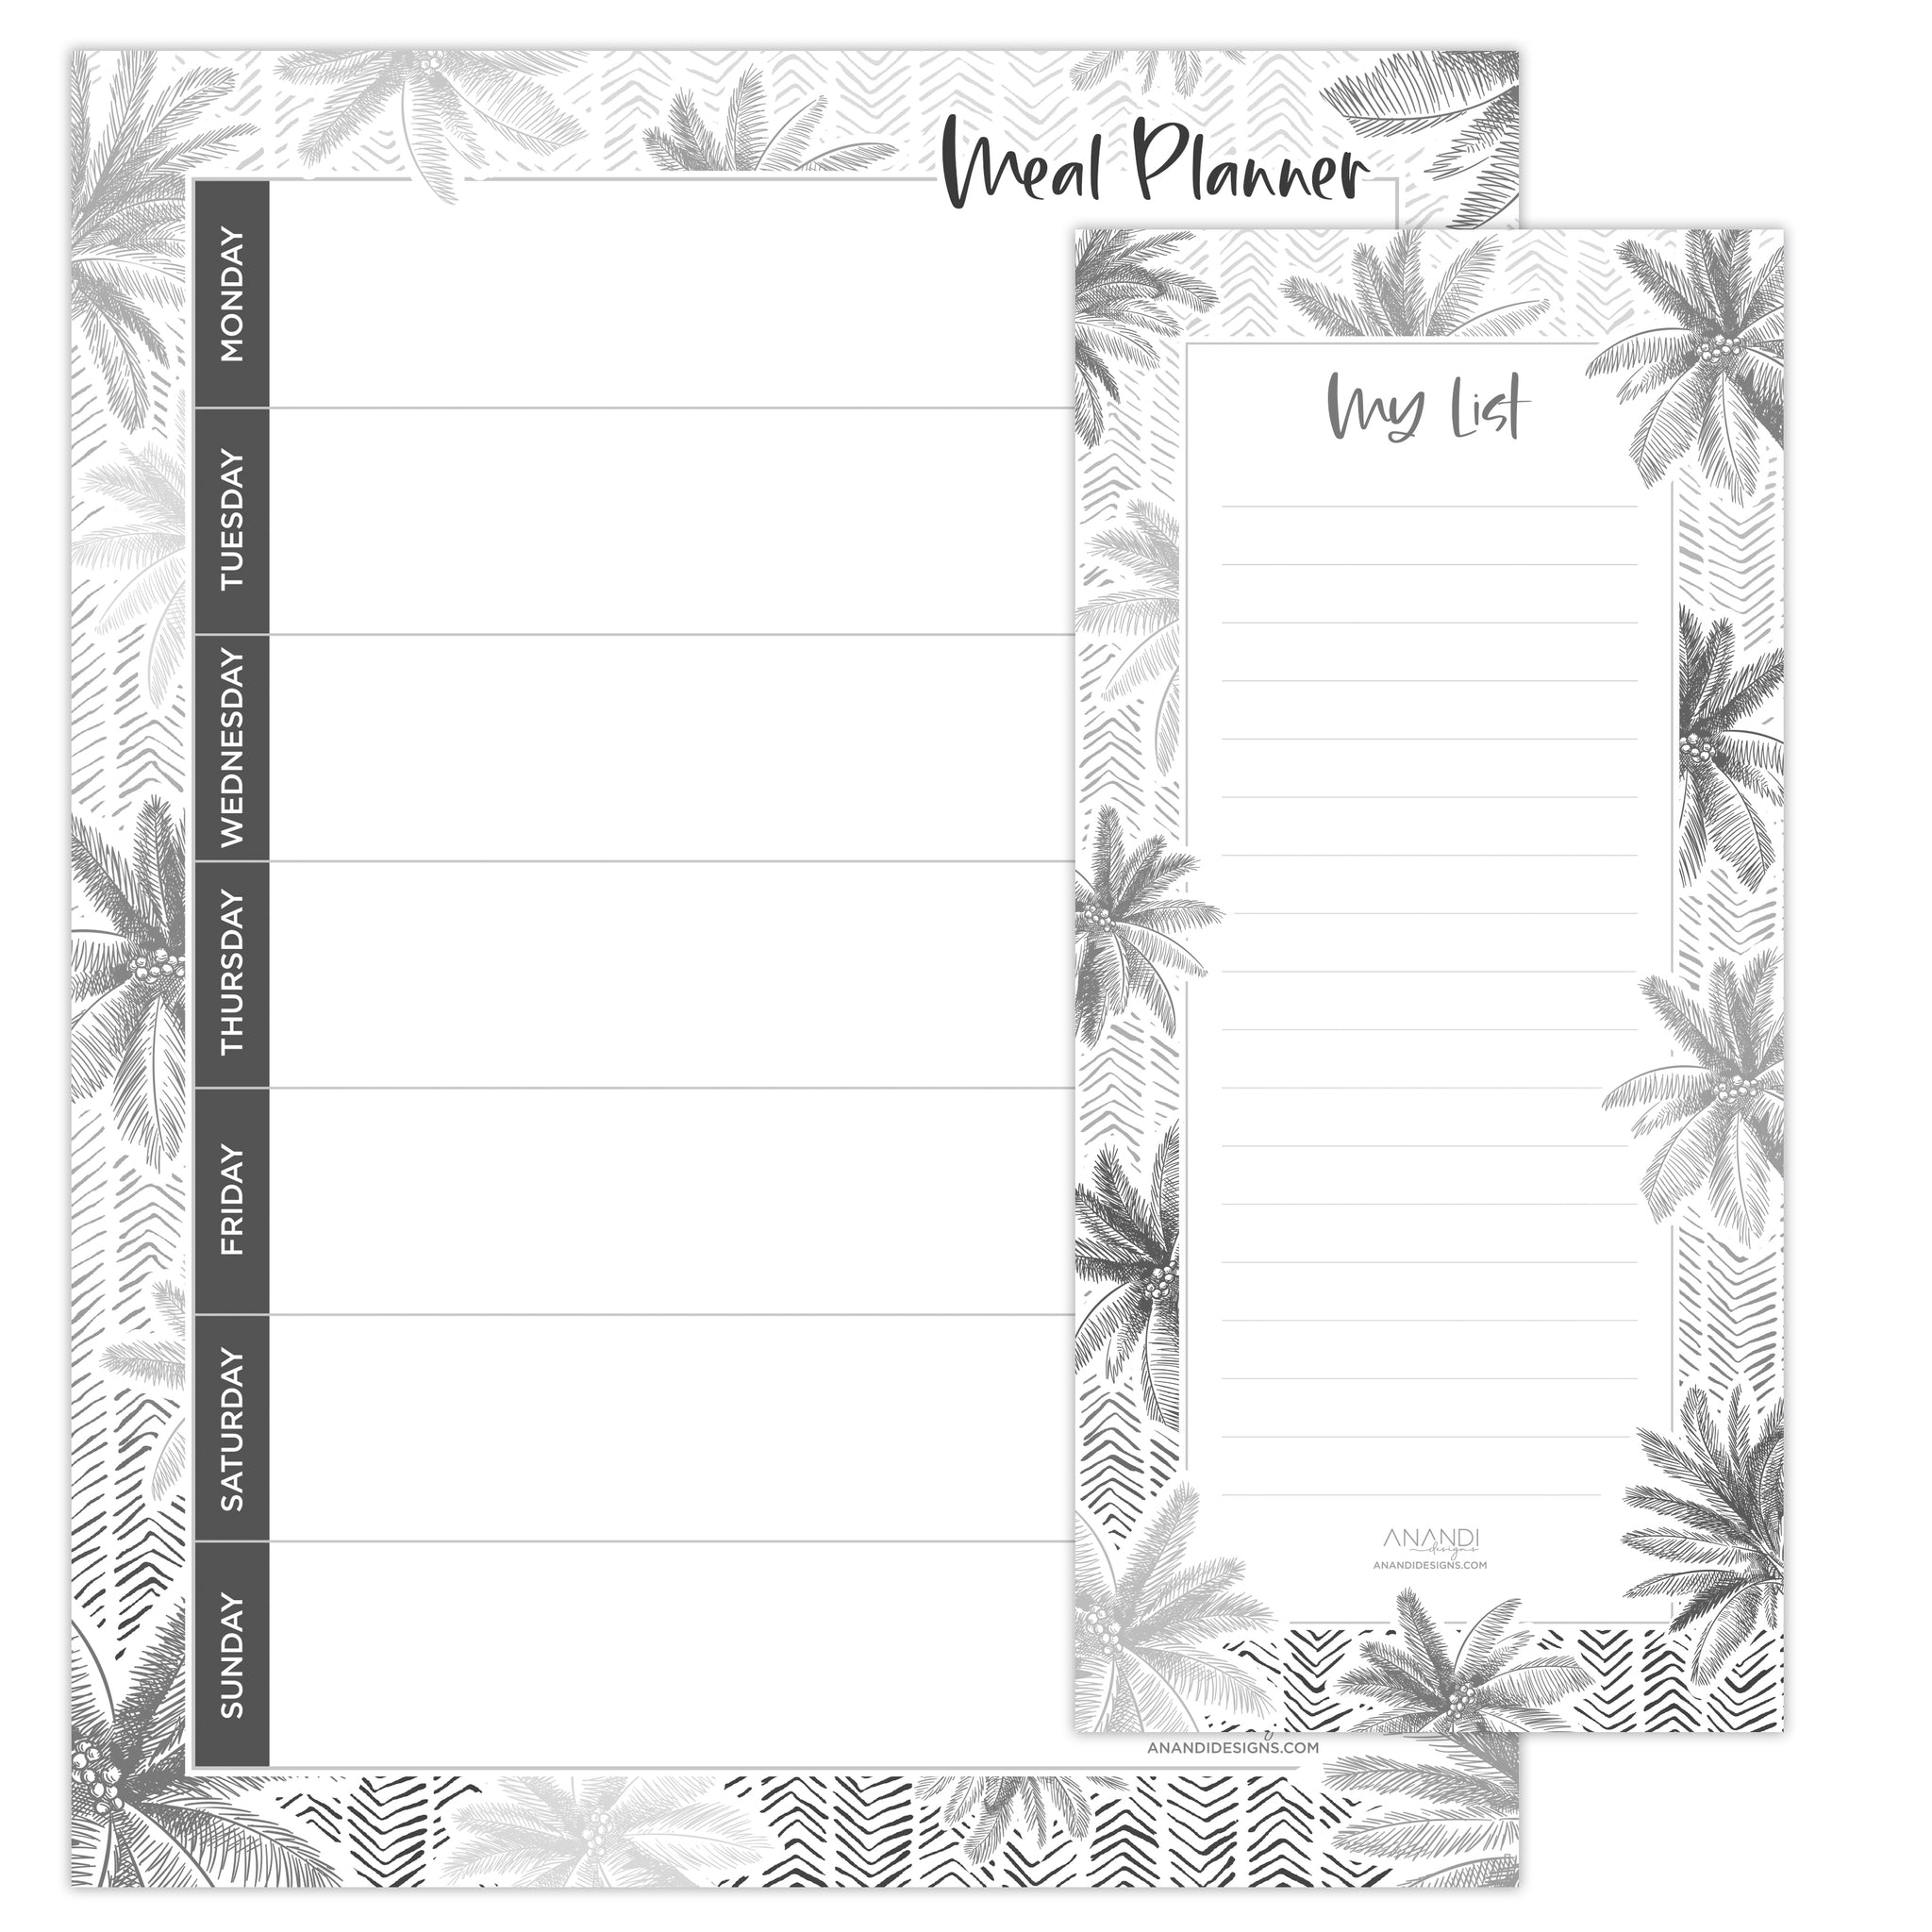 Magnetic Meal Planner Package - Palm Cove Design Save $6.95